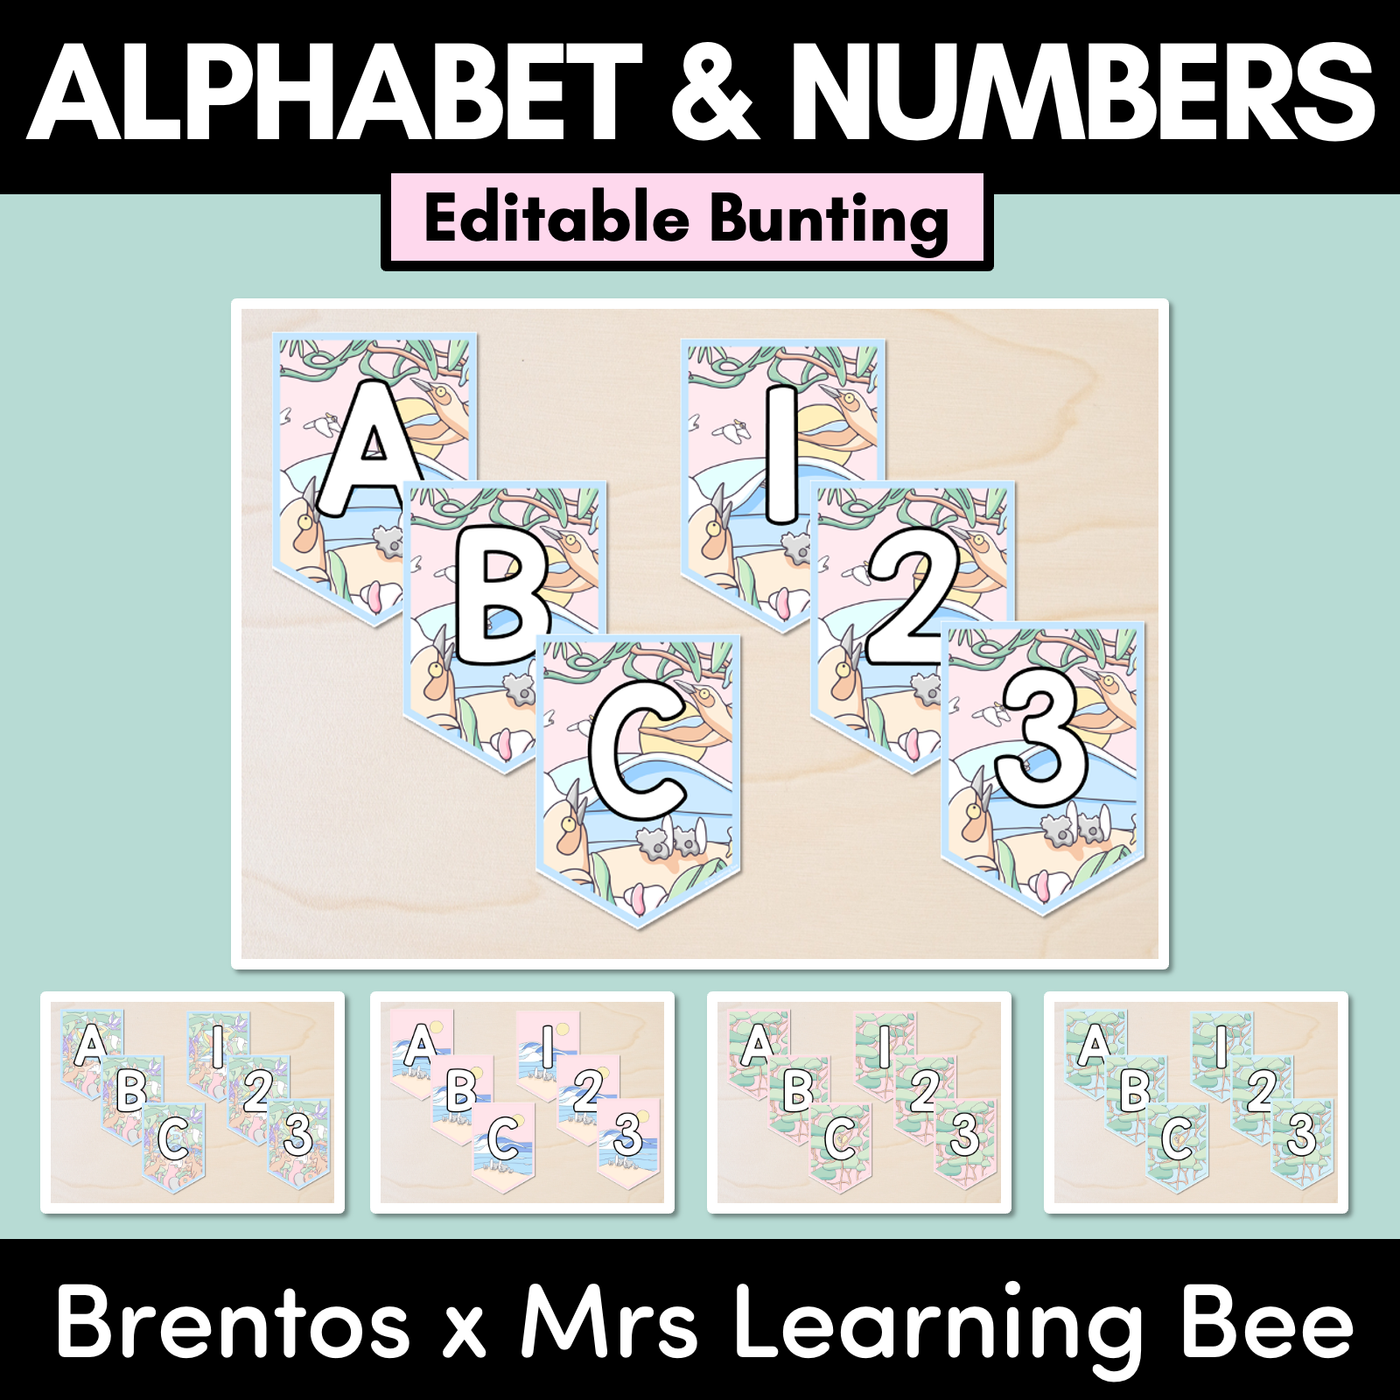 EDITABLE BUNTING - Alphabet & Numbers - The Brentos Collection